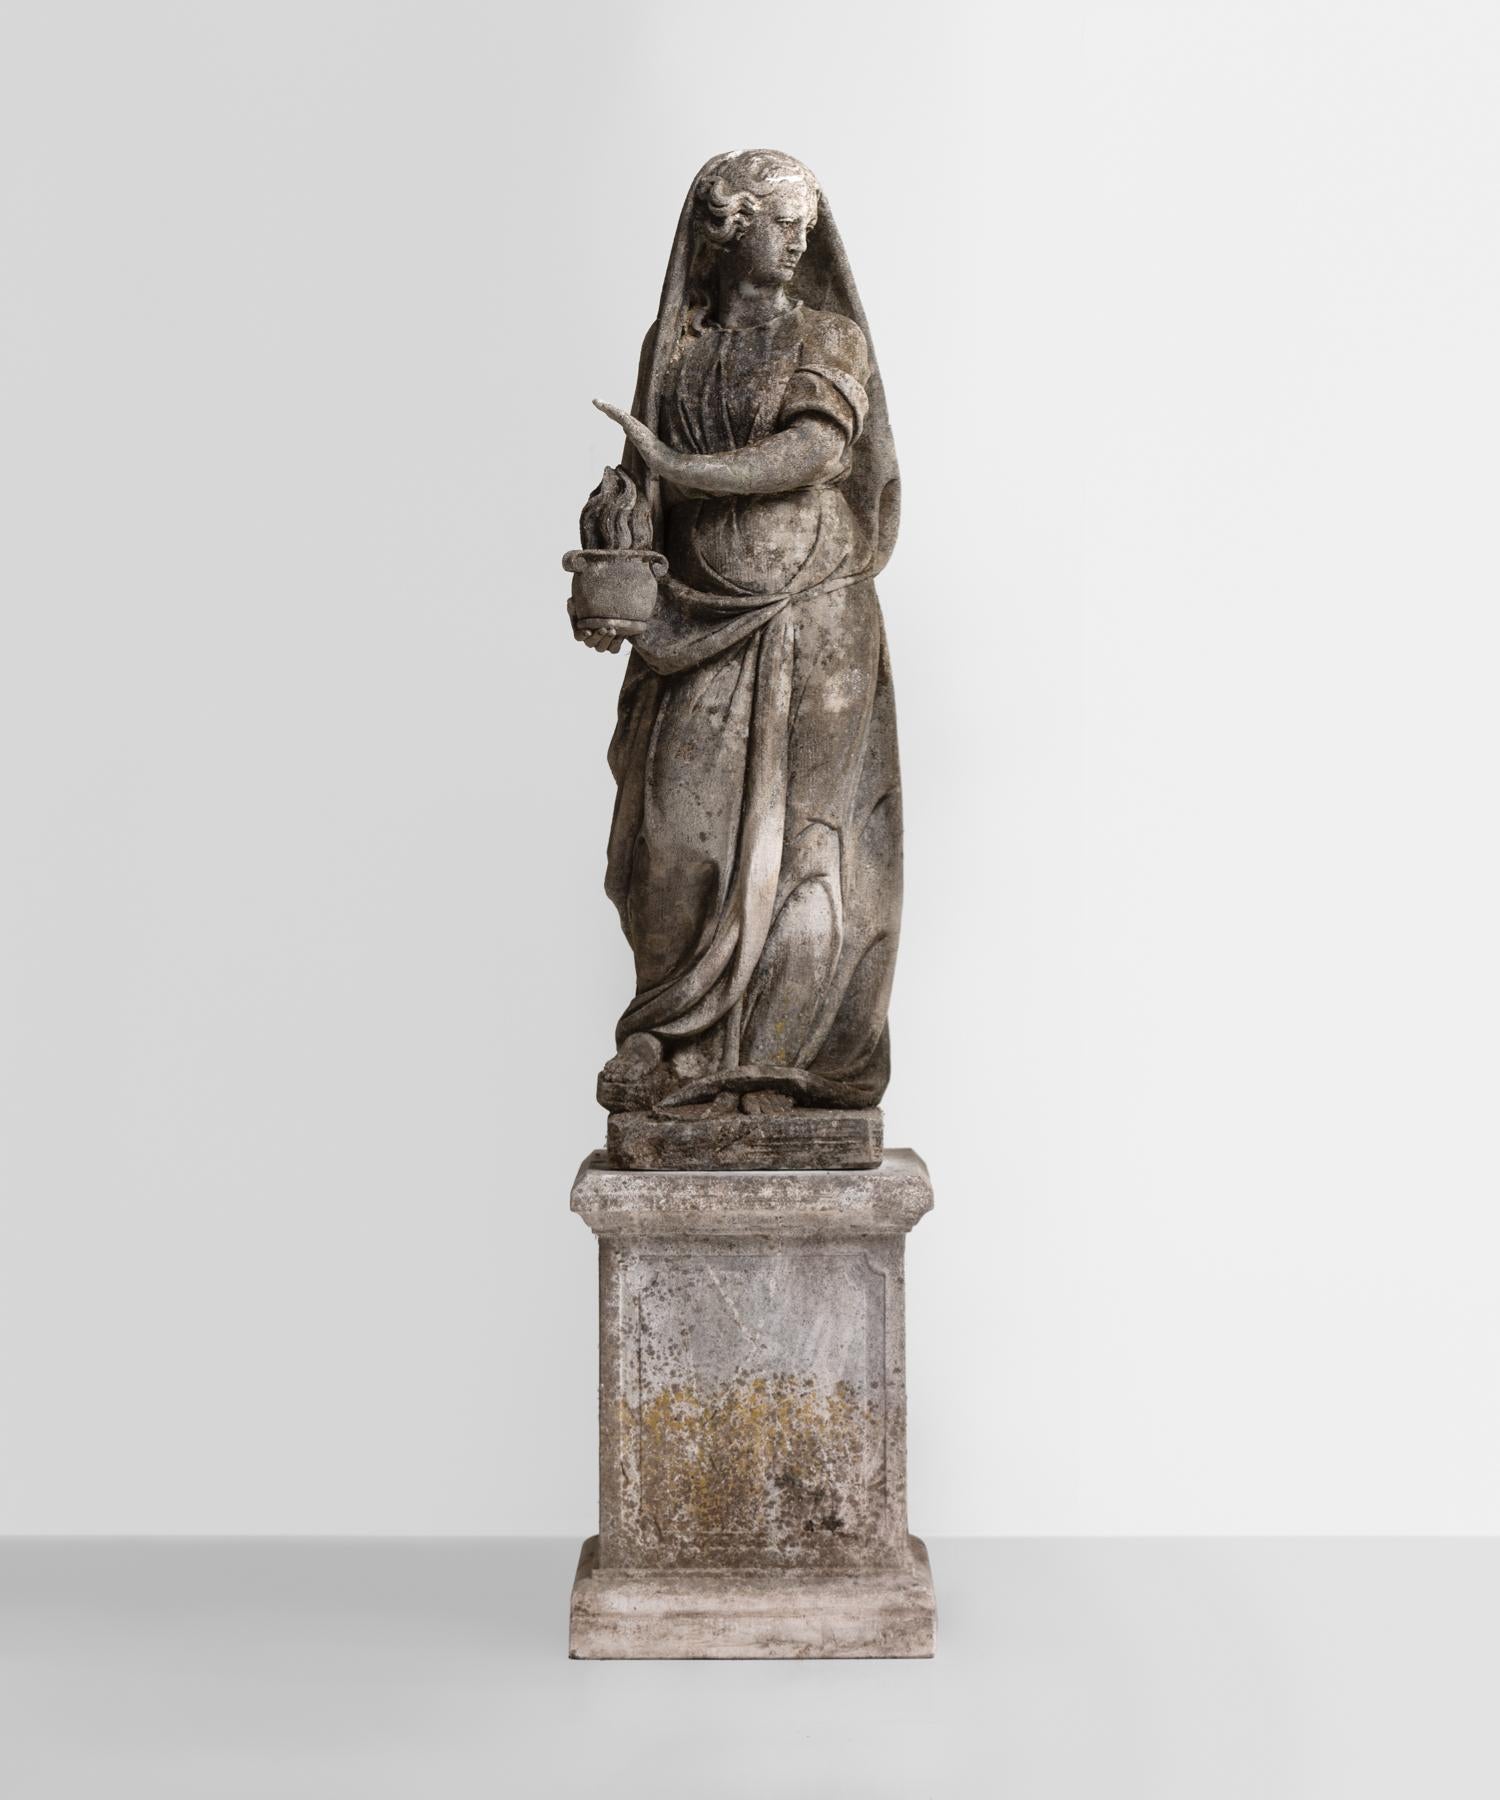 Cast stone garden statue, Italy, circa 1930.

Statue of a female archetypal figure. Beautifully weathered and elevated on a simple base.